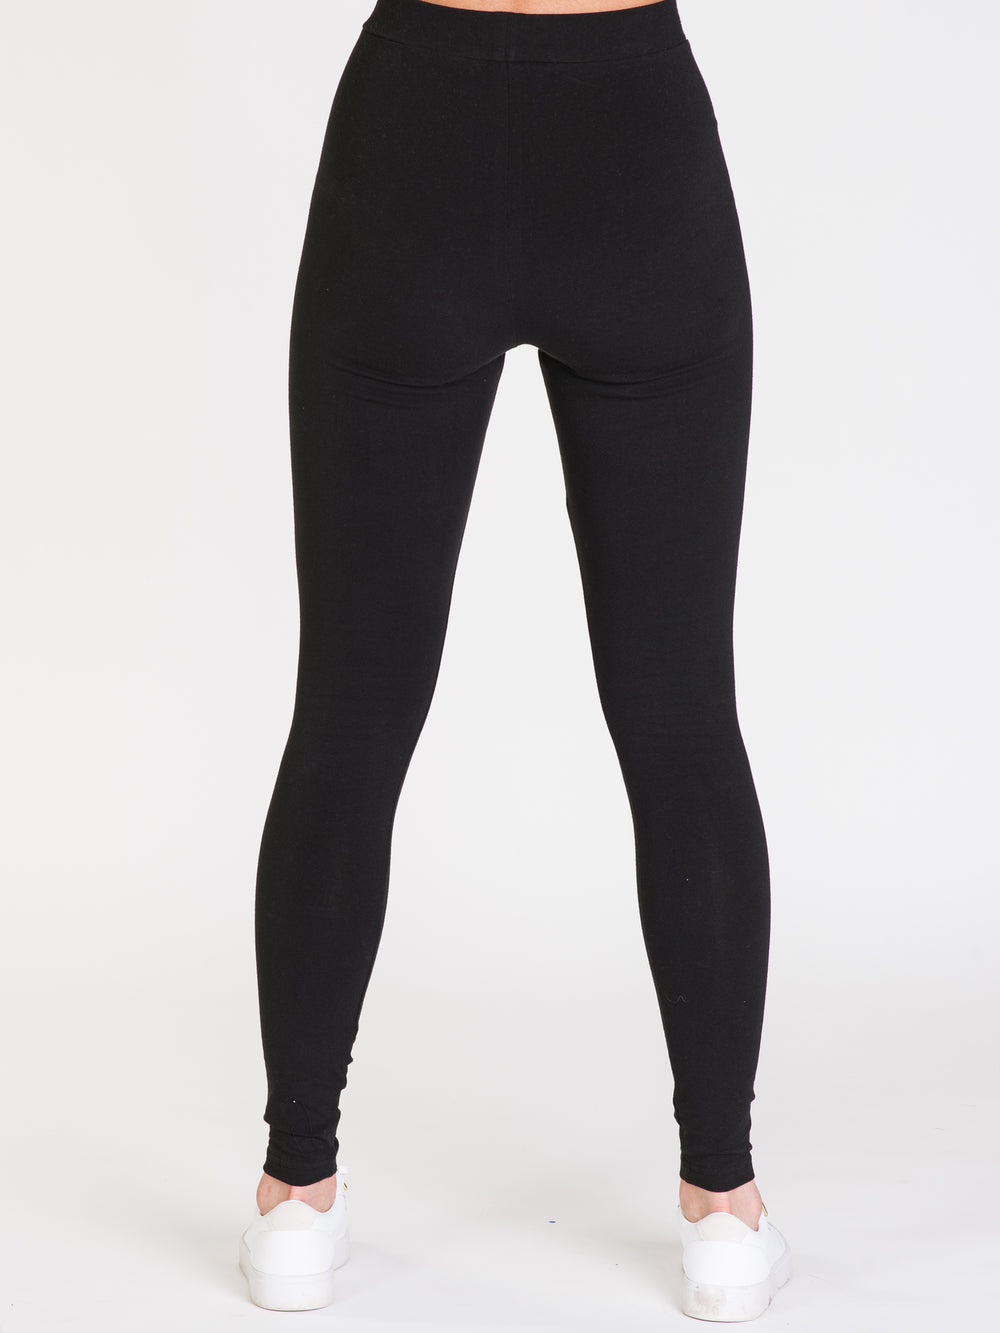 ADIDAS MID RISE TIGHT - DÉSTOCKAGE